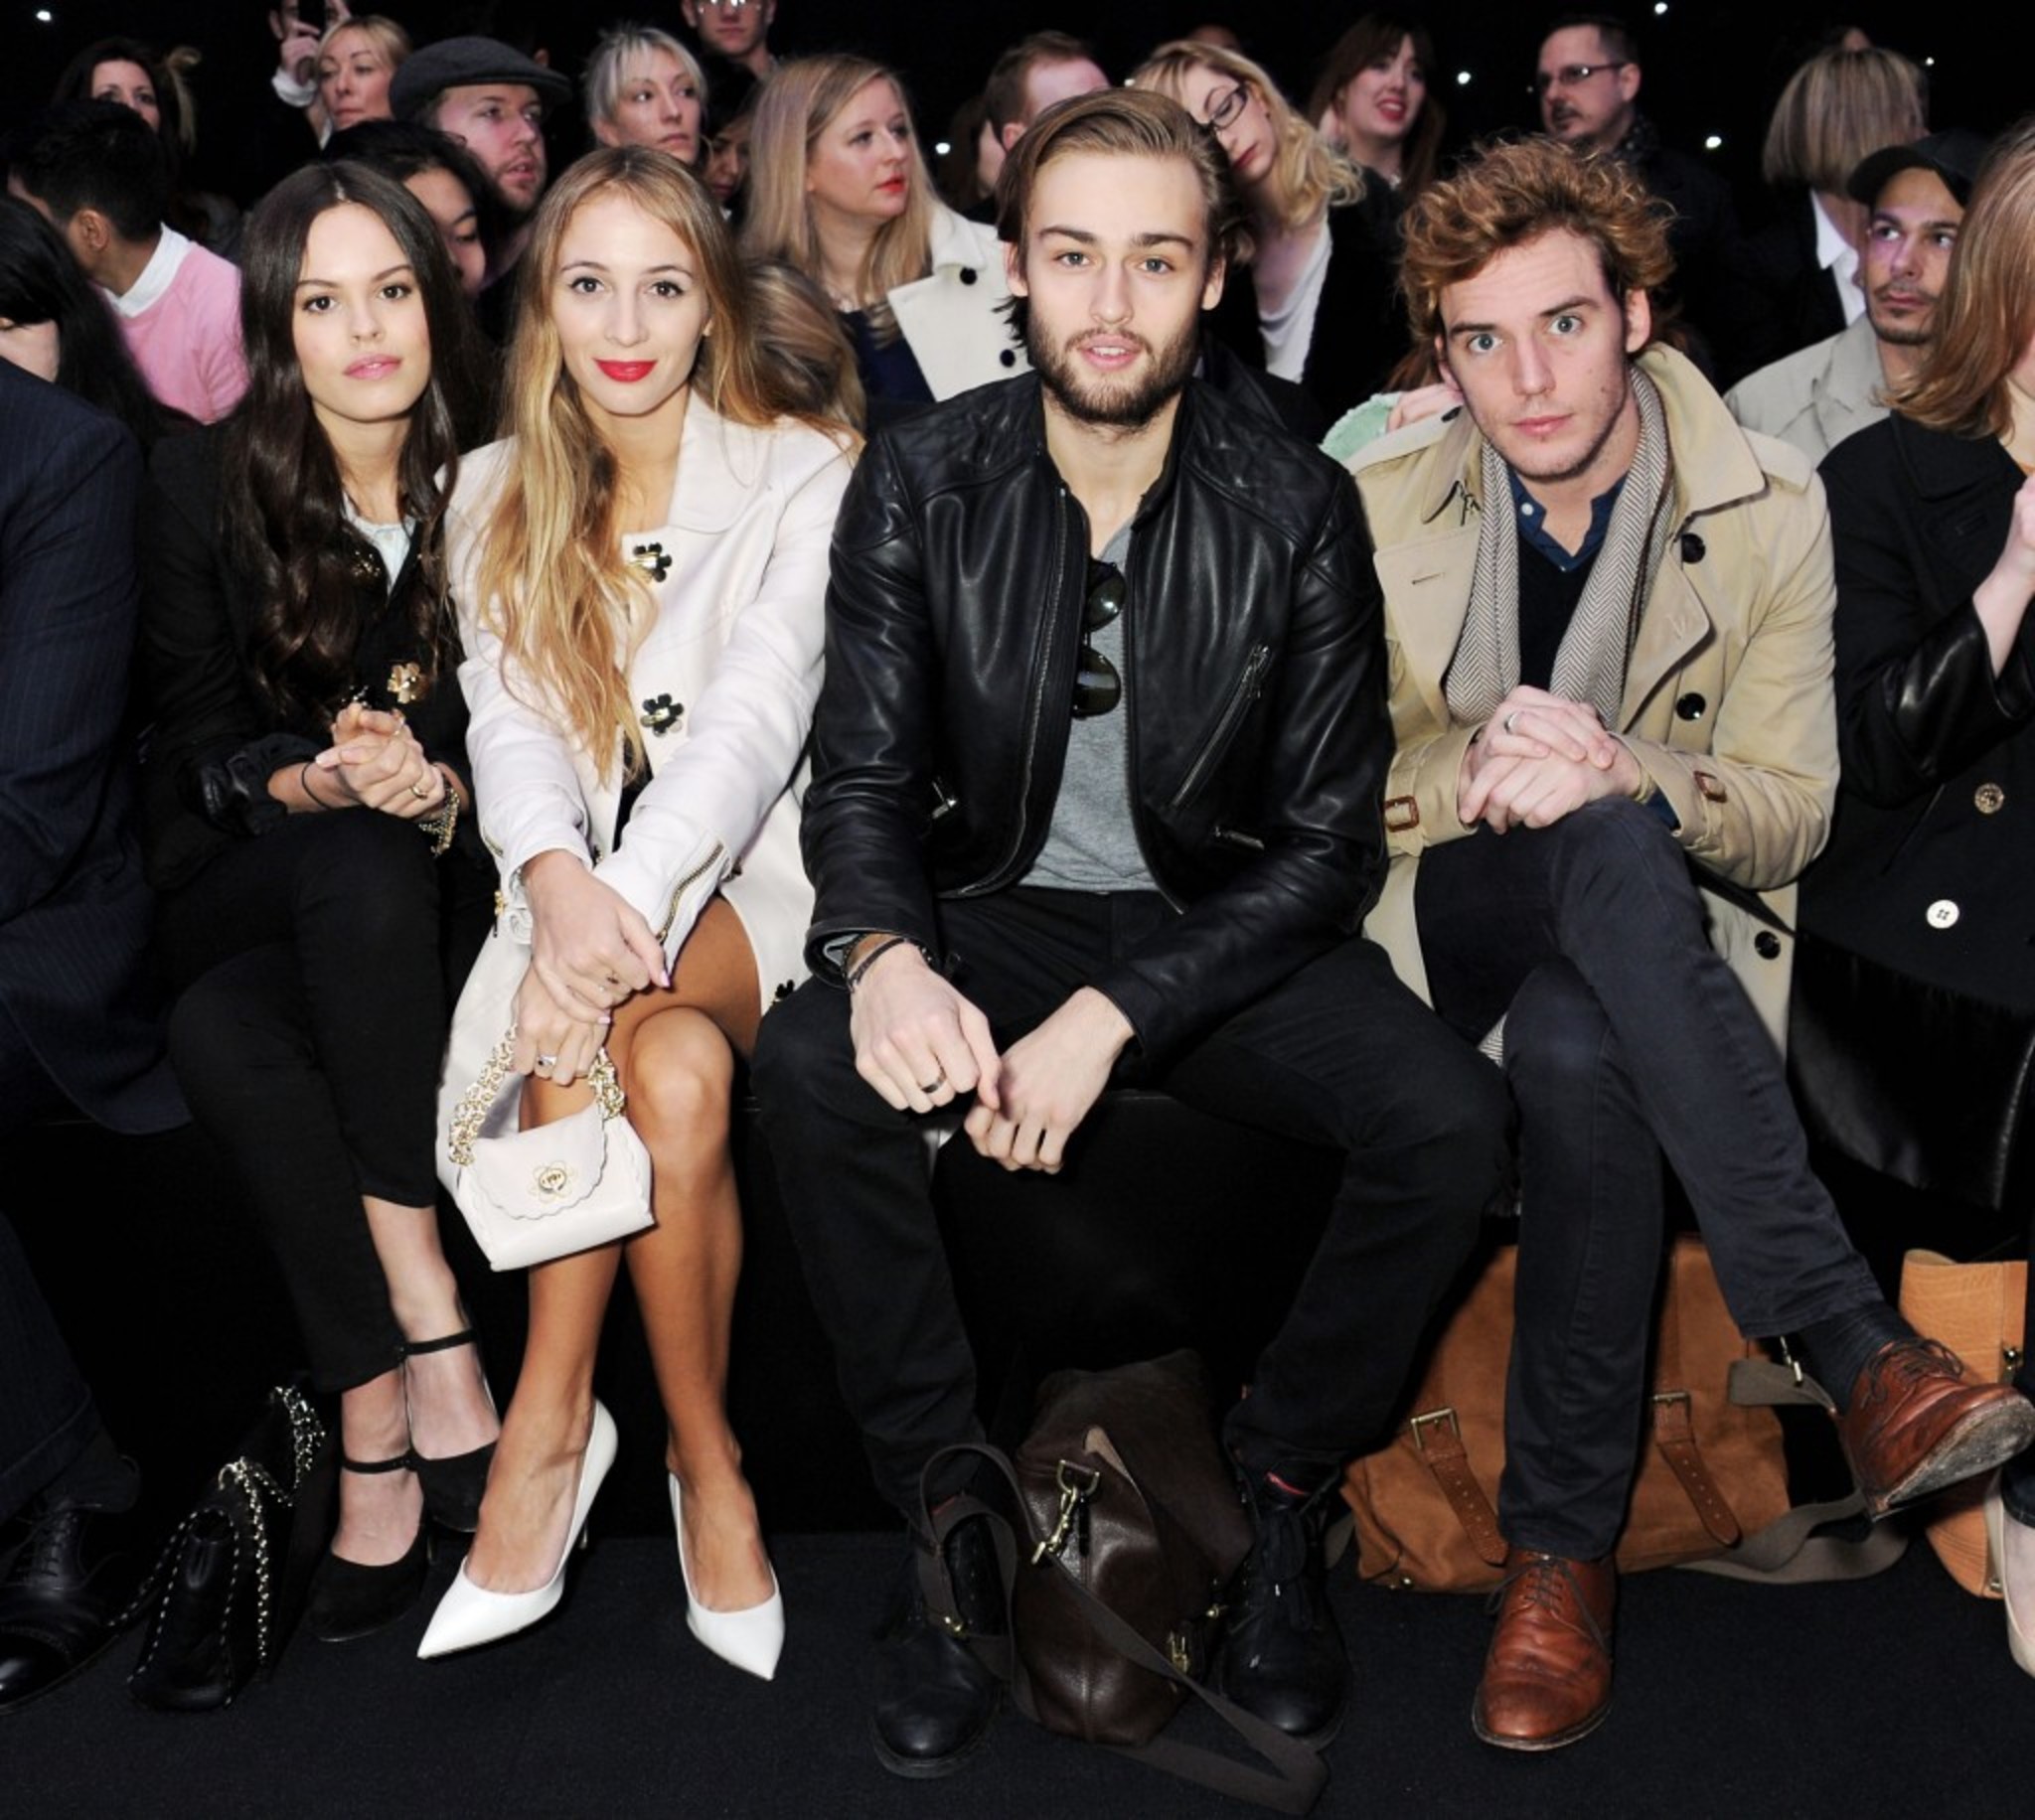 Mulberry Autumn Winter 2013 - London Fashion Week - Arrivals & Front Row